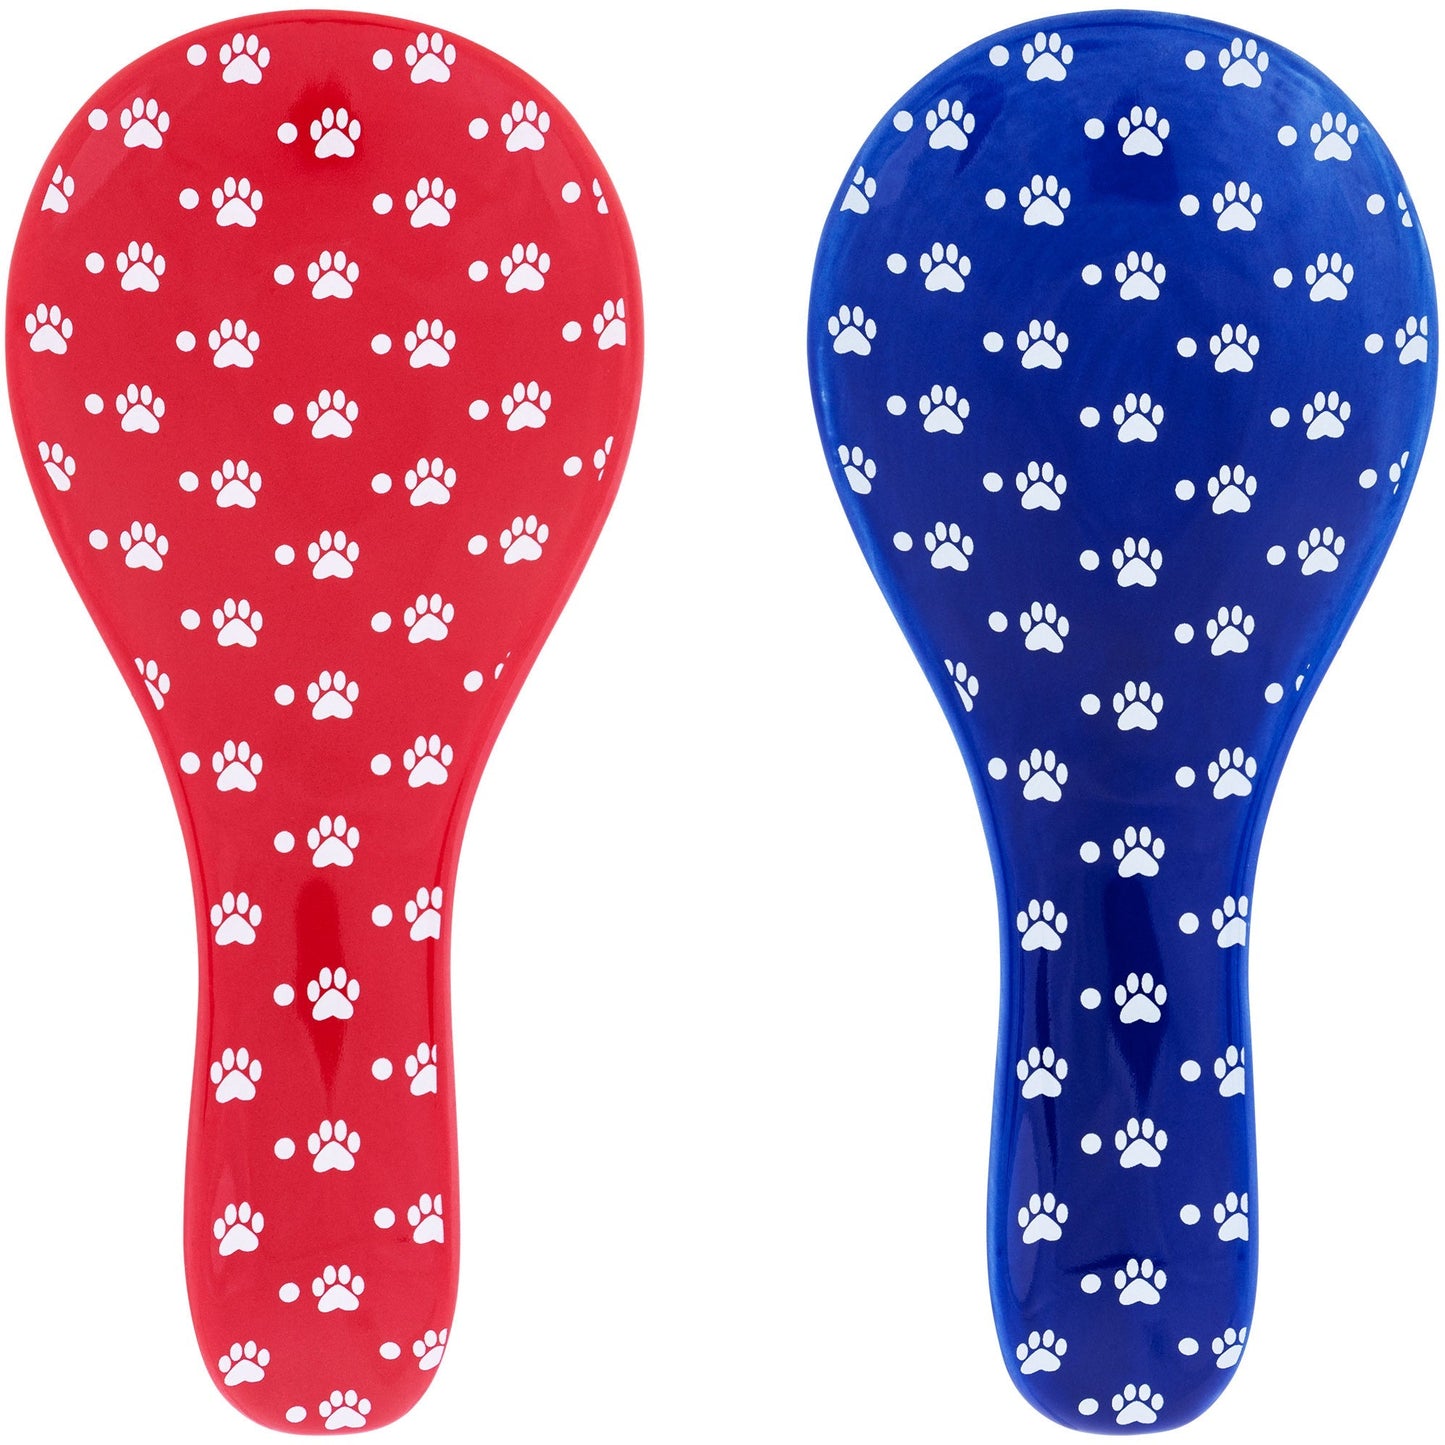 Paws & Dots Spoon Rest